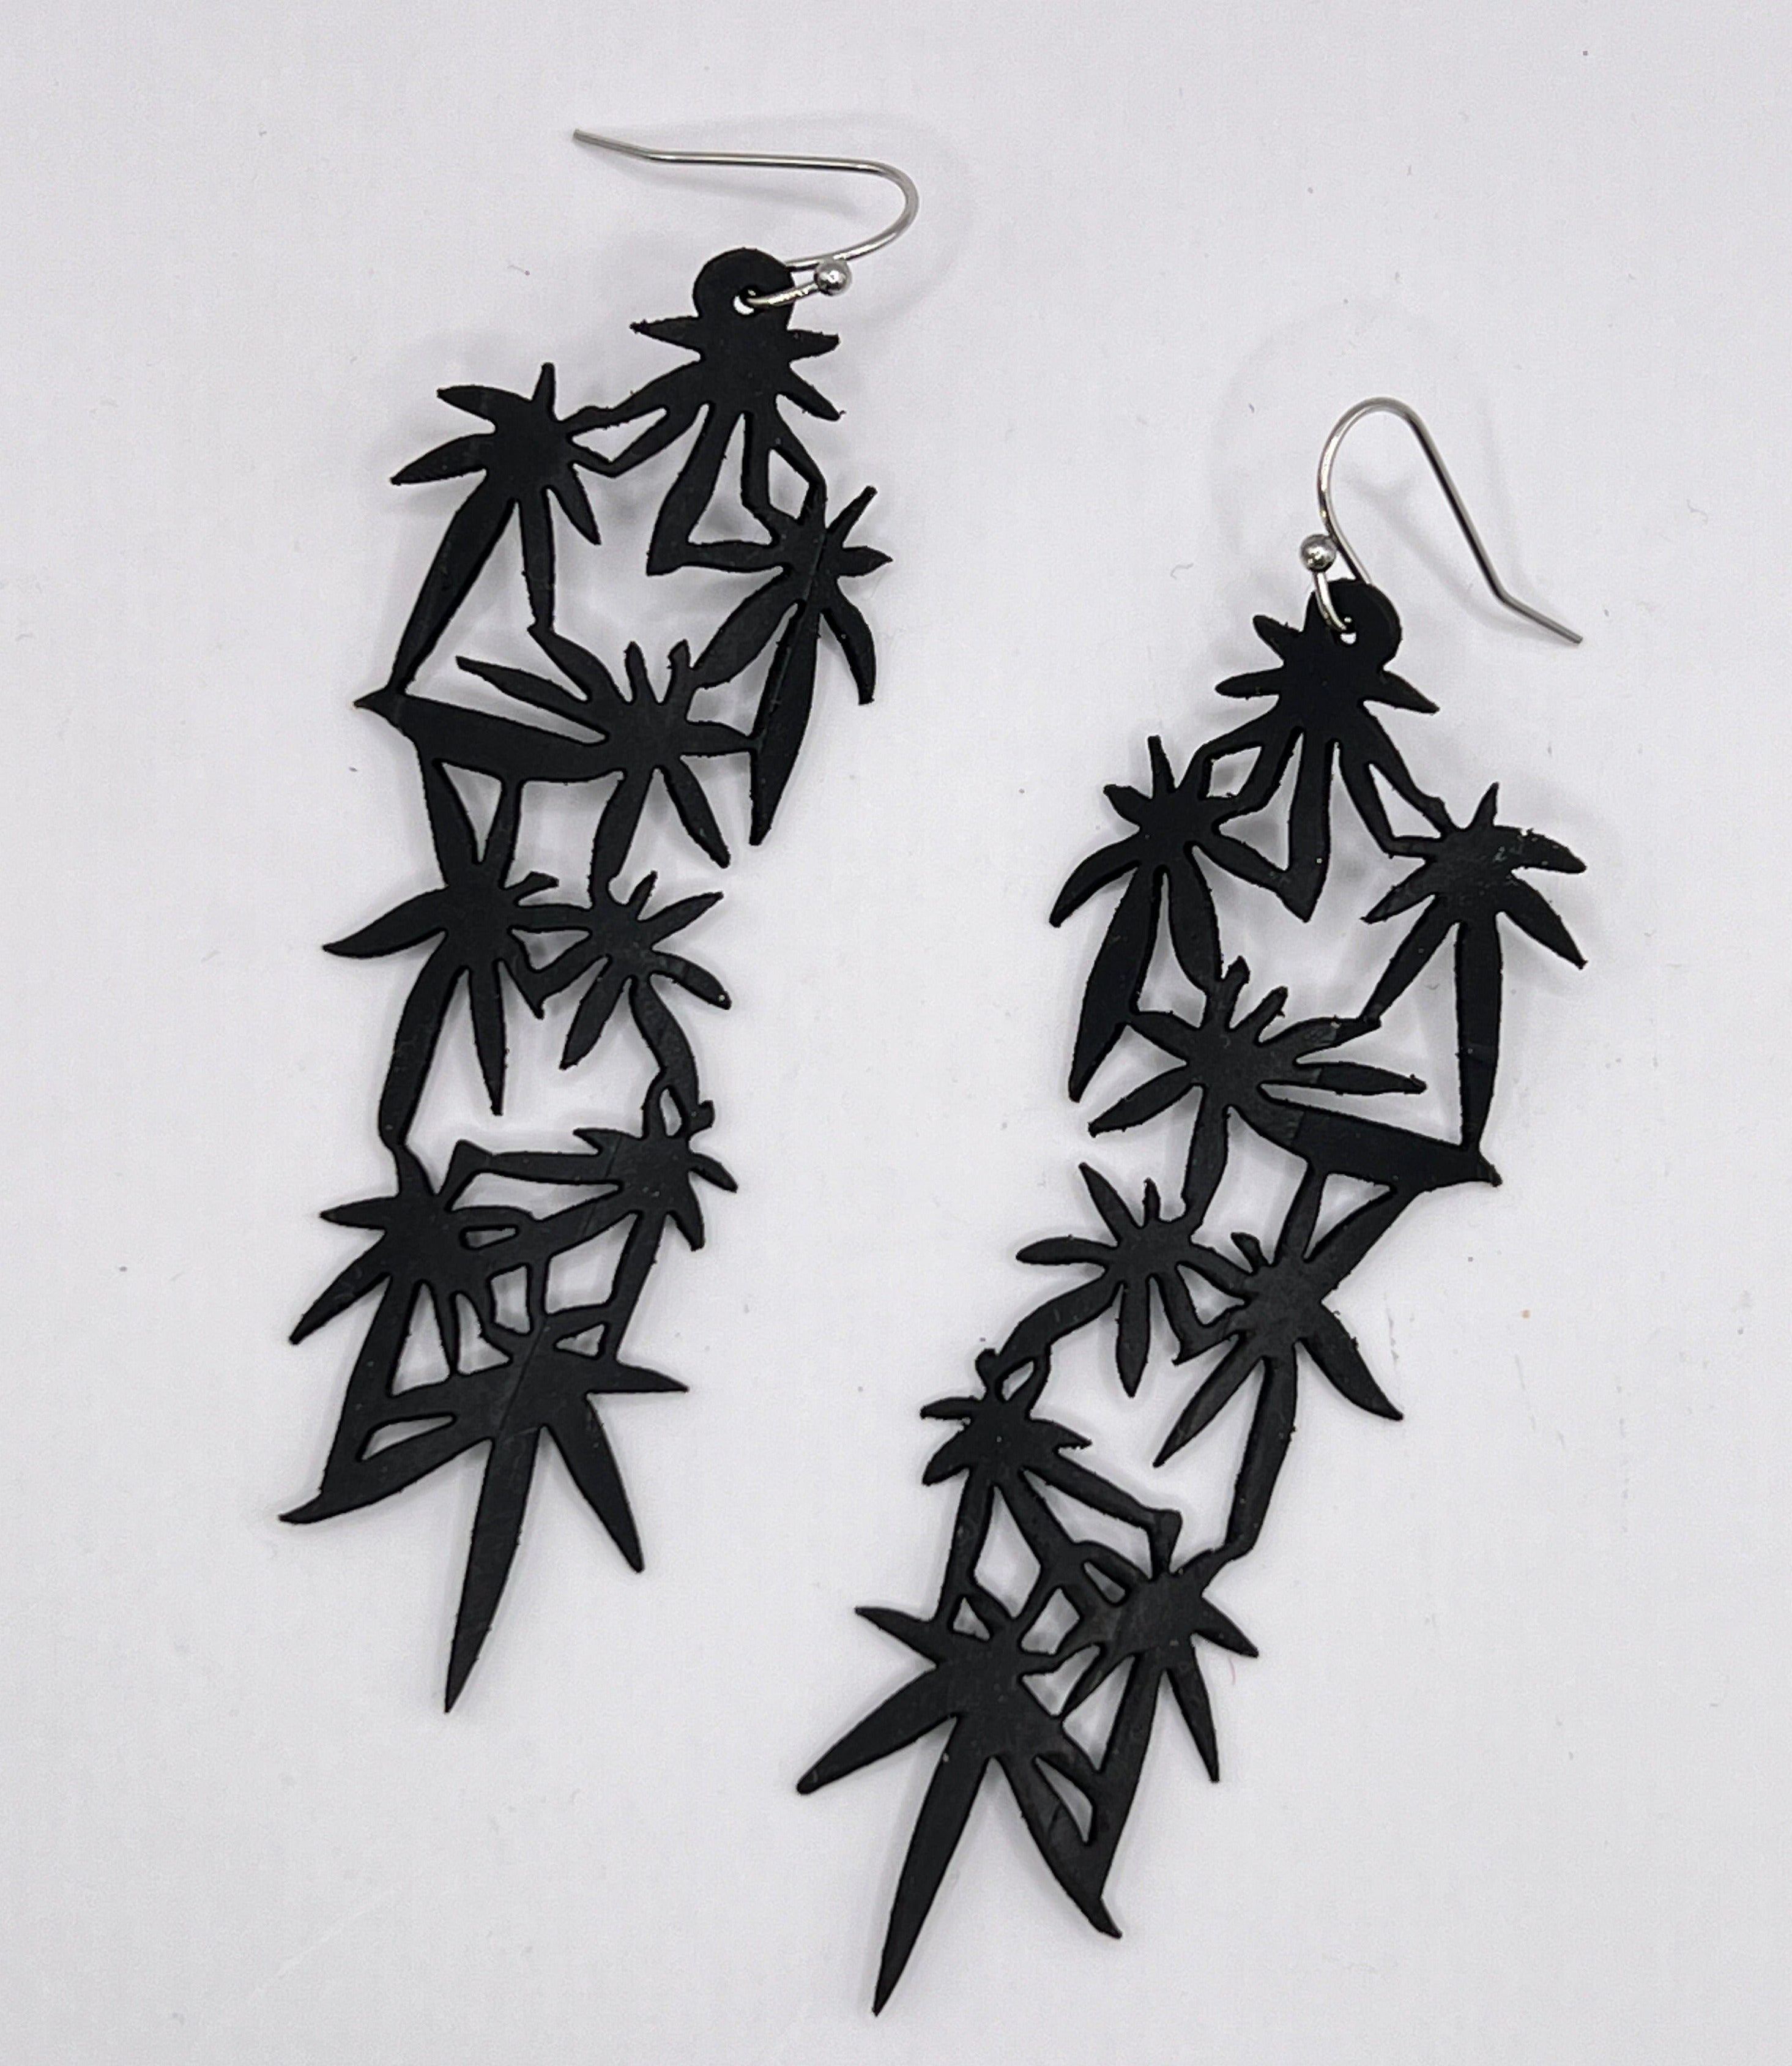 Long overdue the Mary Jane collection 2.0 is here! Abstract and yet playful this nod to a special plant is whimsically subtle. This earring is approximately 3" long and is laser cut from up-cycled bicycle inner tubes, made to order in the USA with stainless steel findings. Wear the rubber nut backs because these earrings will fly away!